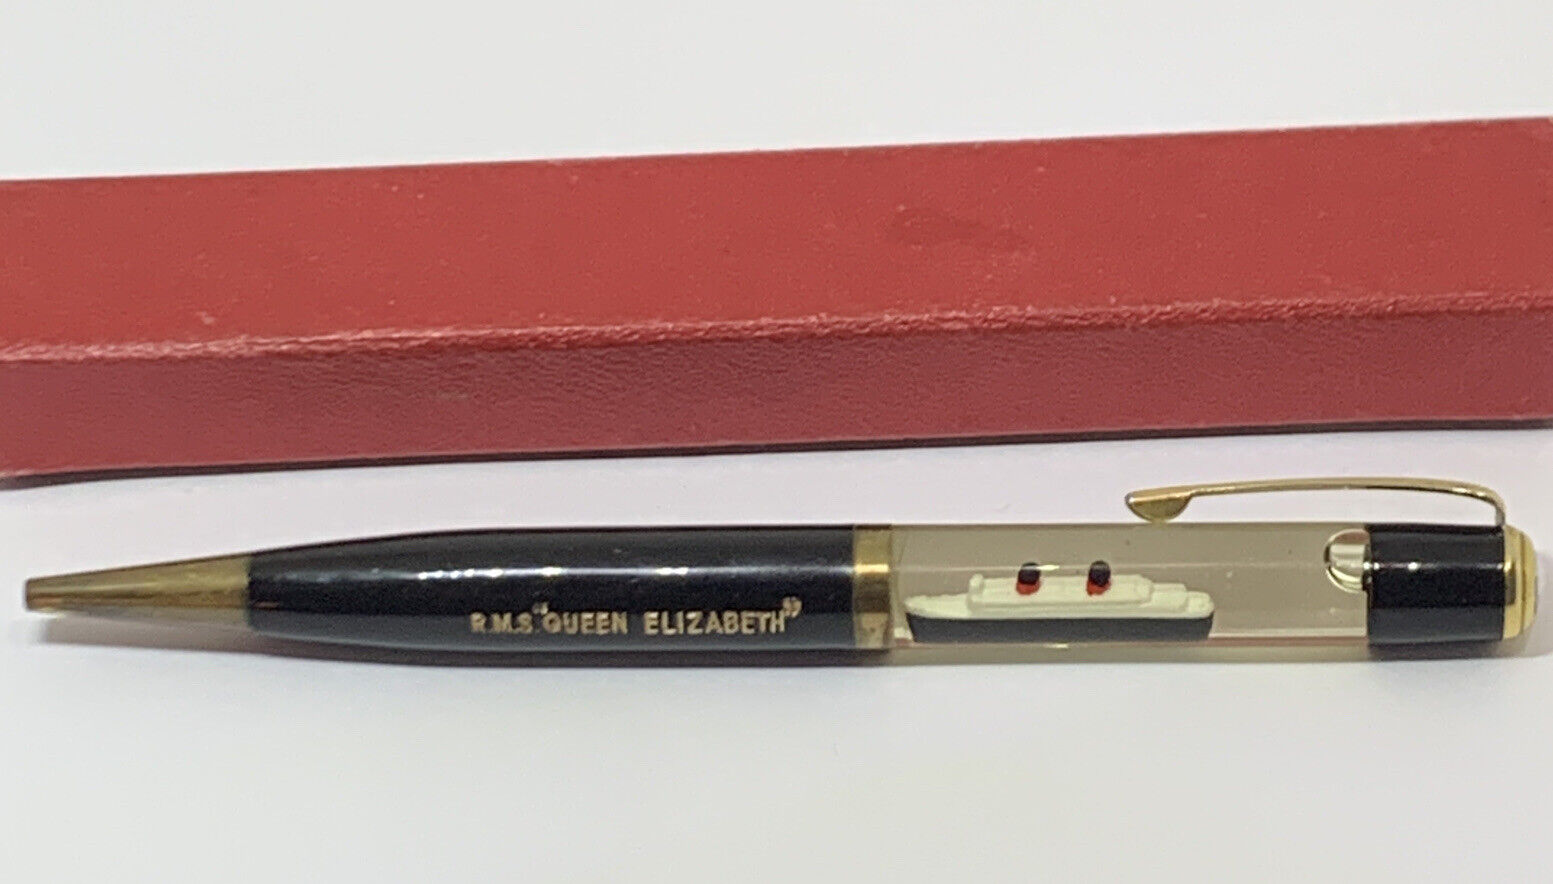 VTG 1950’s RMS Queen Elizabeth Floating Ship Ballpoint Pen With Box